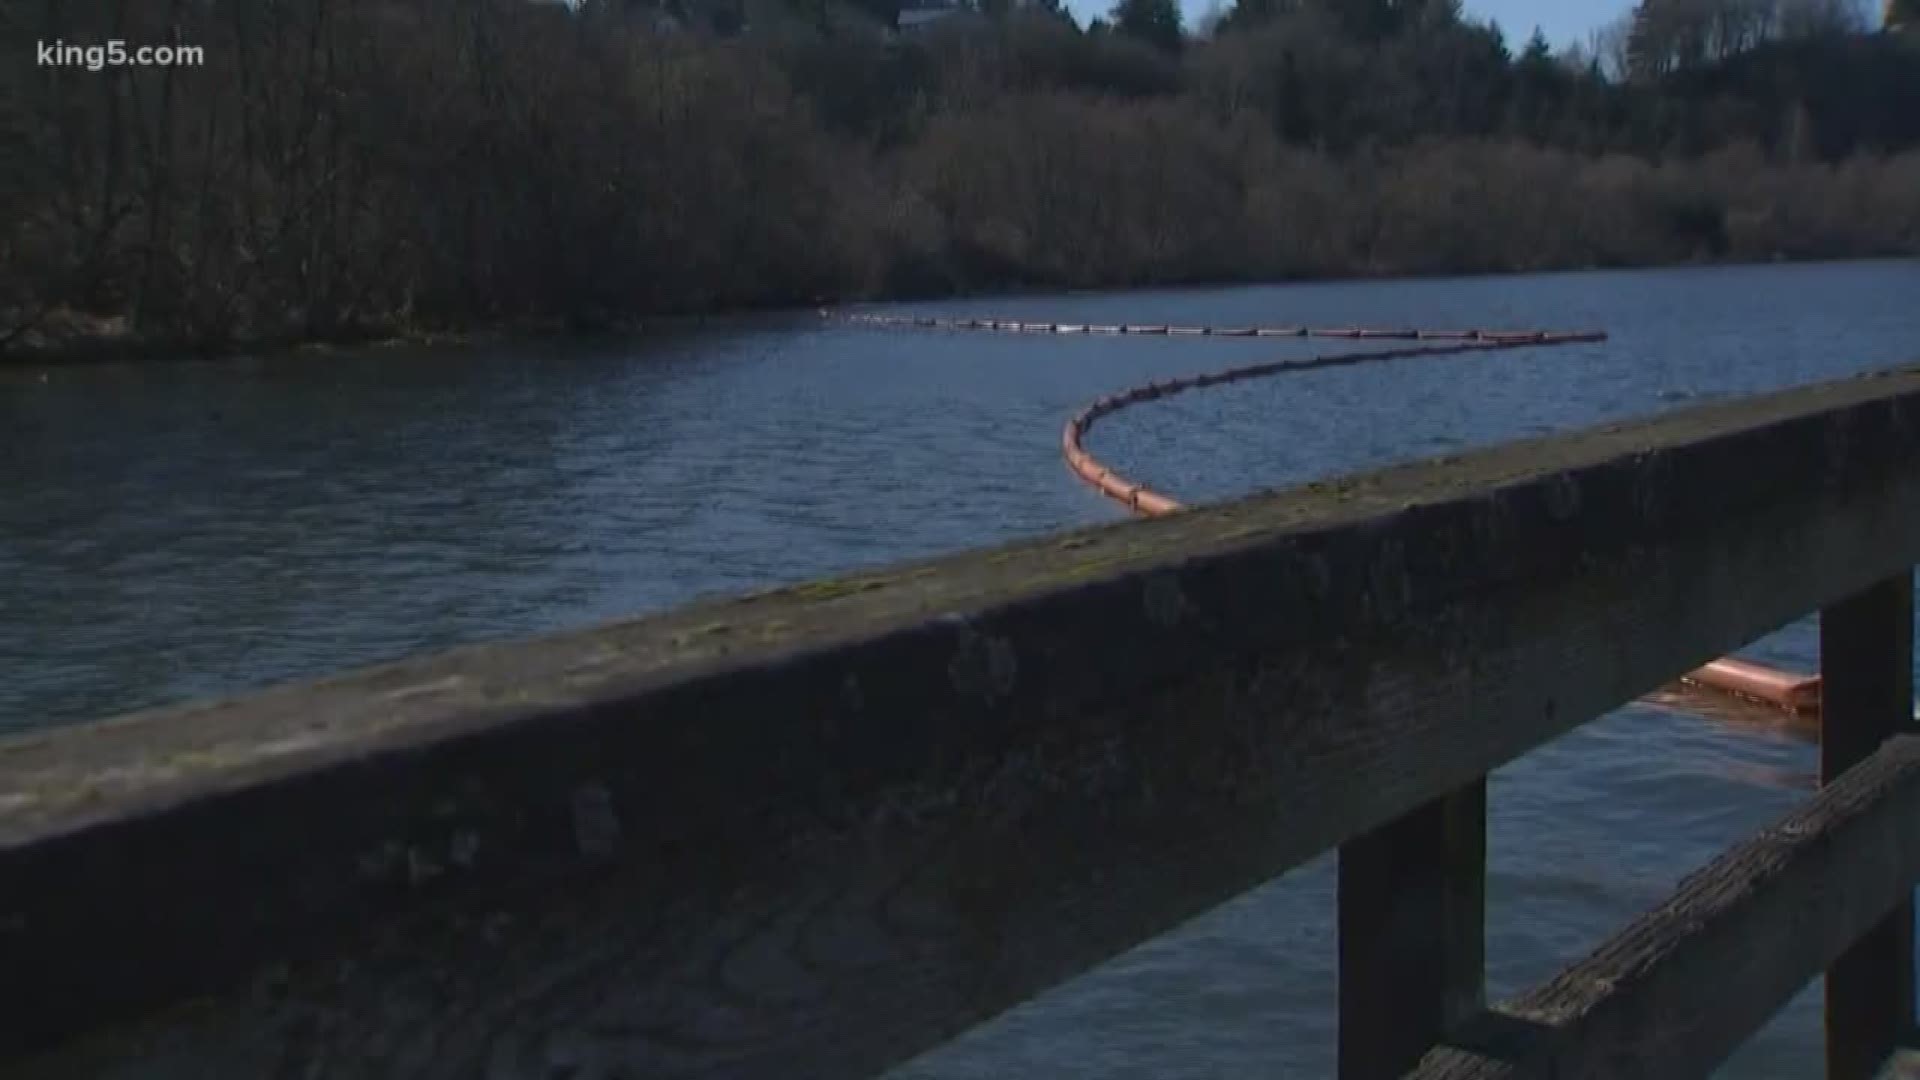 The oil spill that originated at the former Olympia Brewery is believed to have started after vandals damaged a transformer.